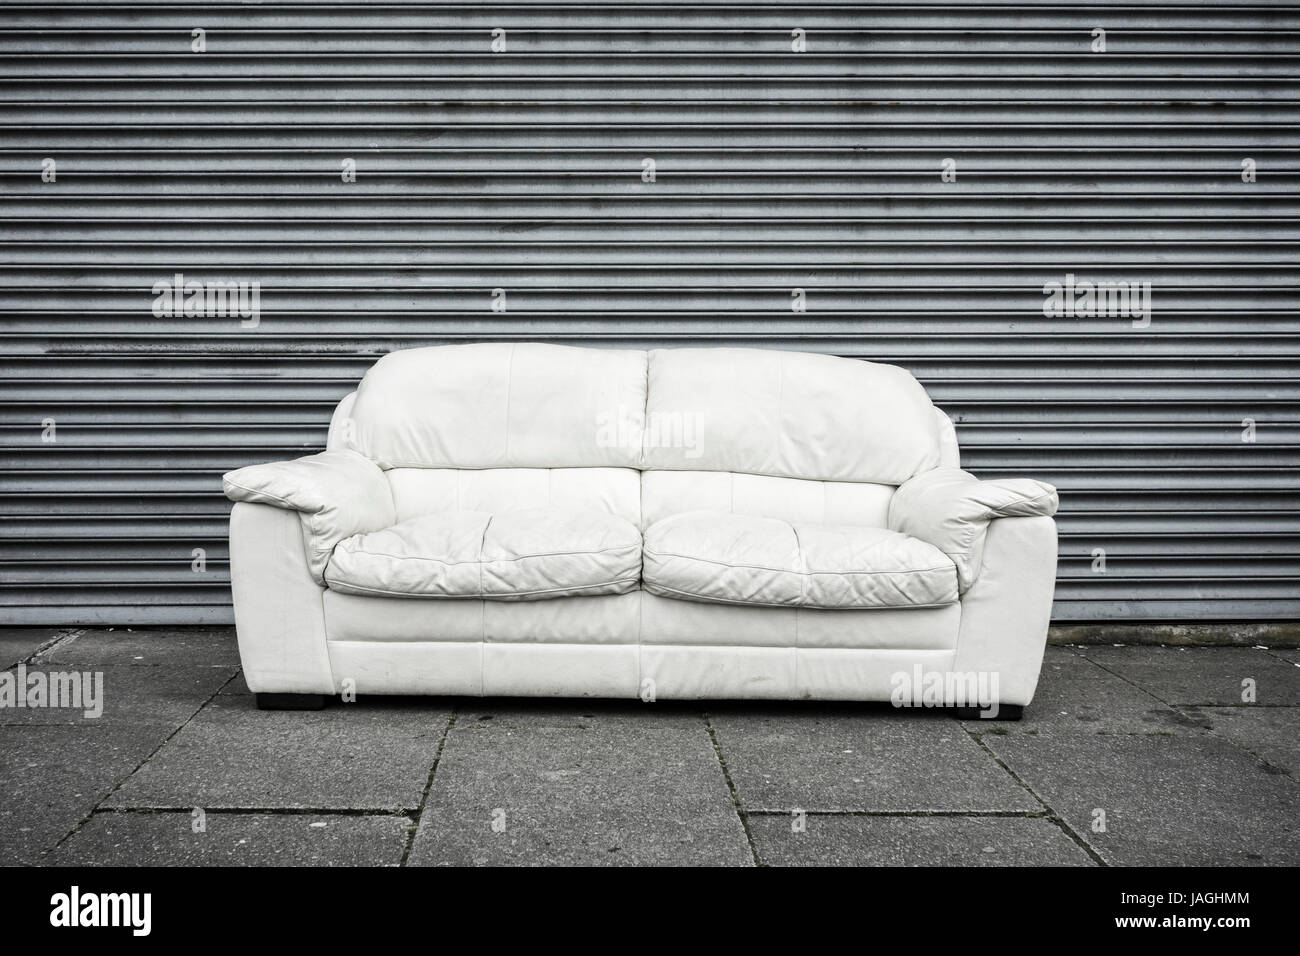 Sofa outside closed shutters in street. UK Stock Photo